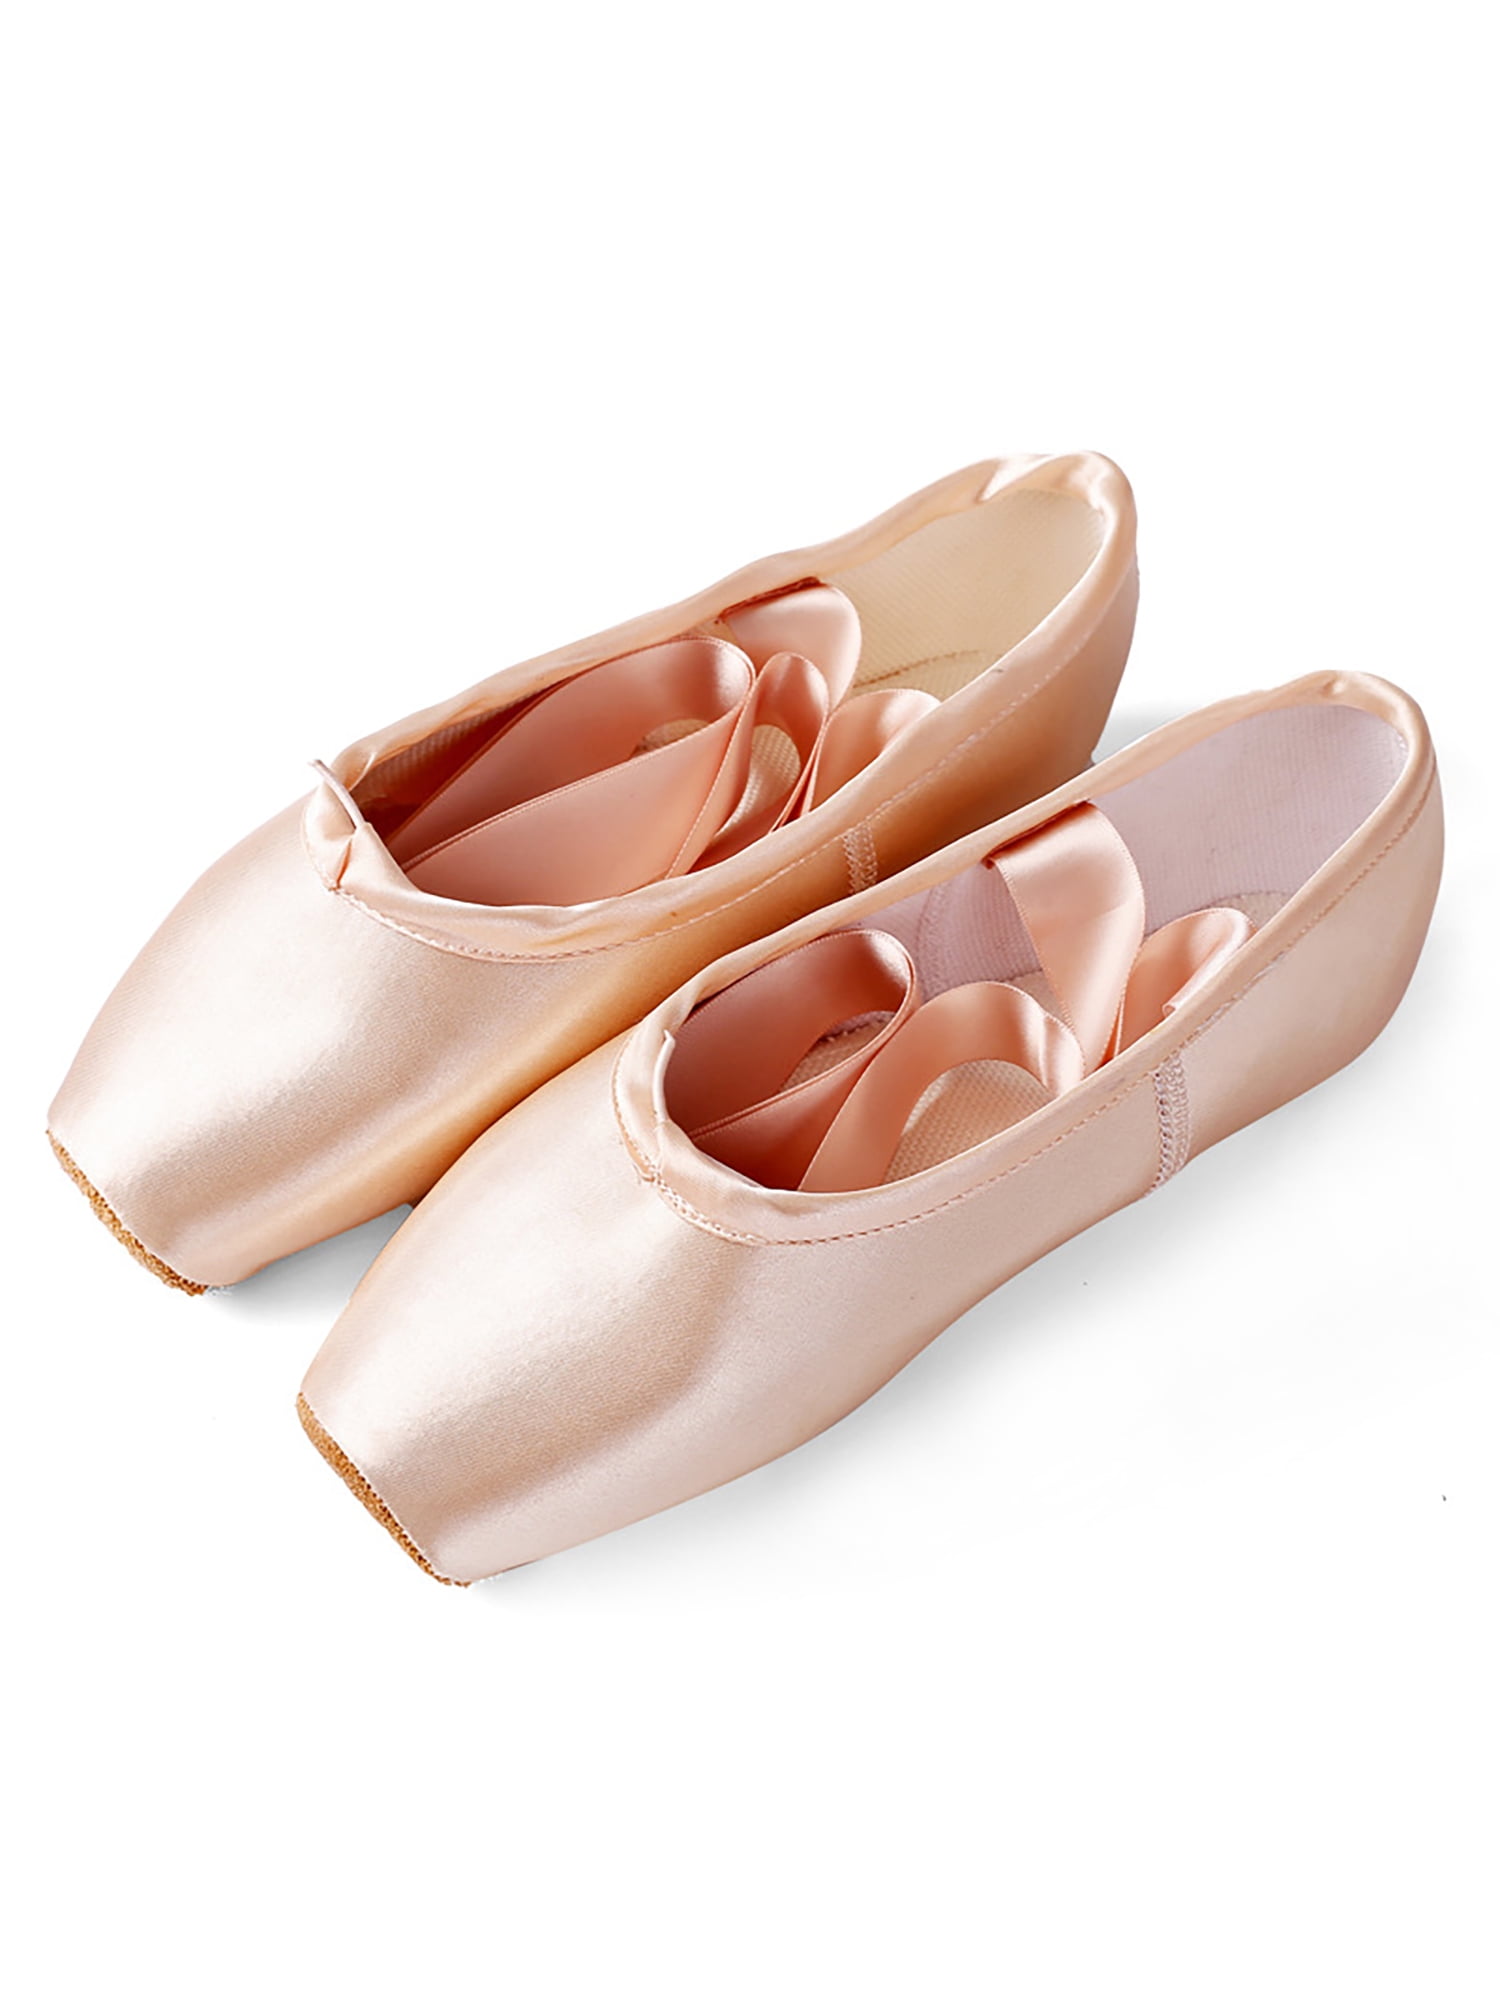 Brand new Pink Pointe Shoes size 6/6.5 